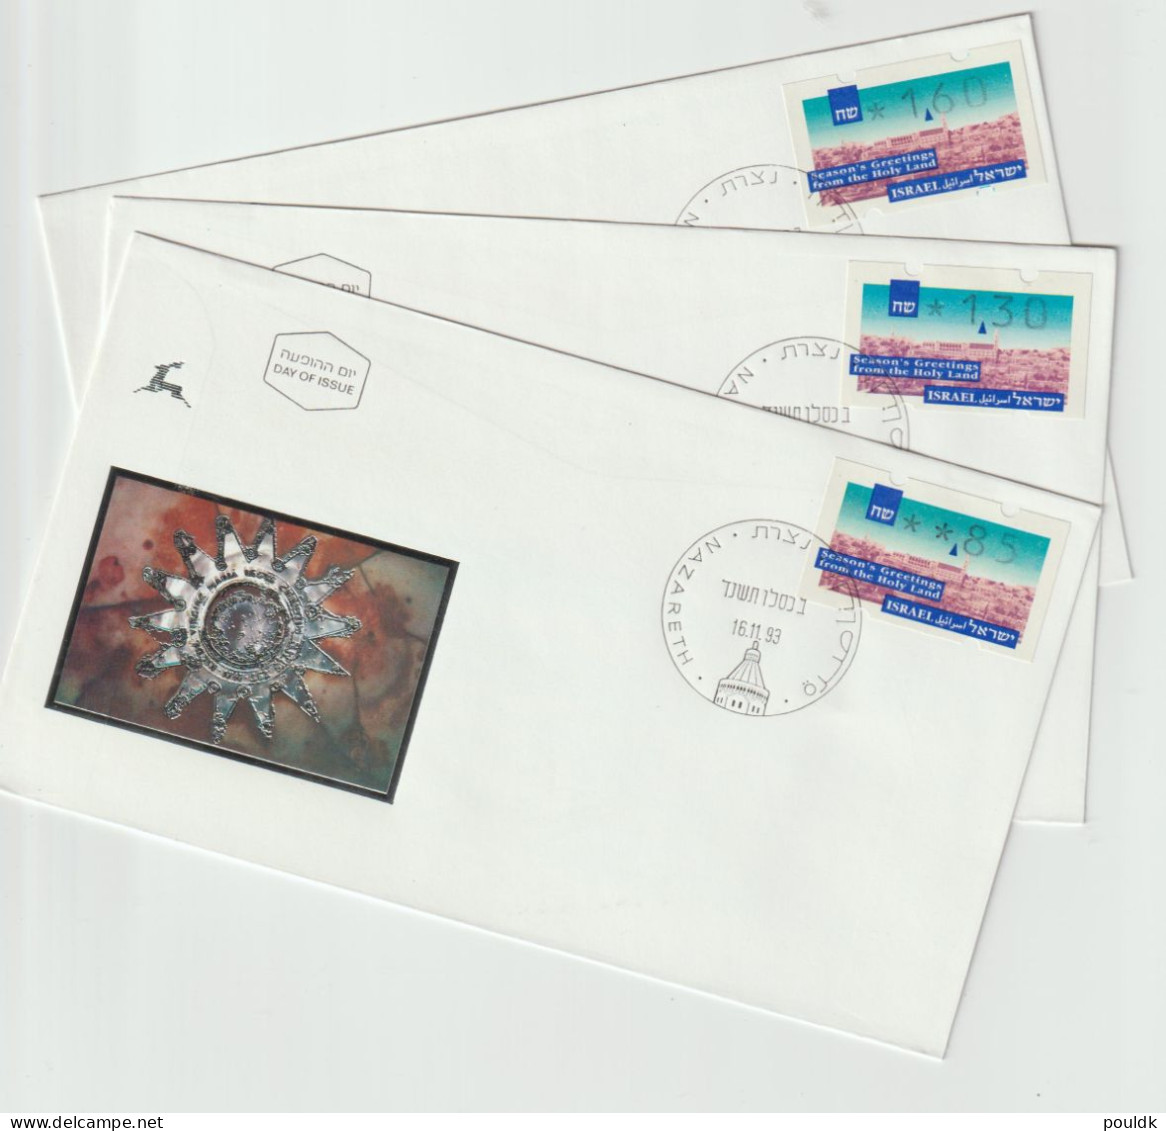 Israel 1993 ATM Christmas - Three FDC From Nazareth. Postal Weight 0,04 Kg. Please Read Sales Conditions Under Image Of - Automatenmarken [ATM]